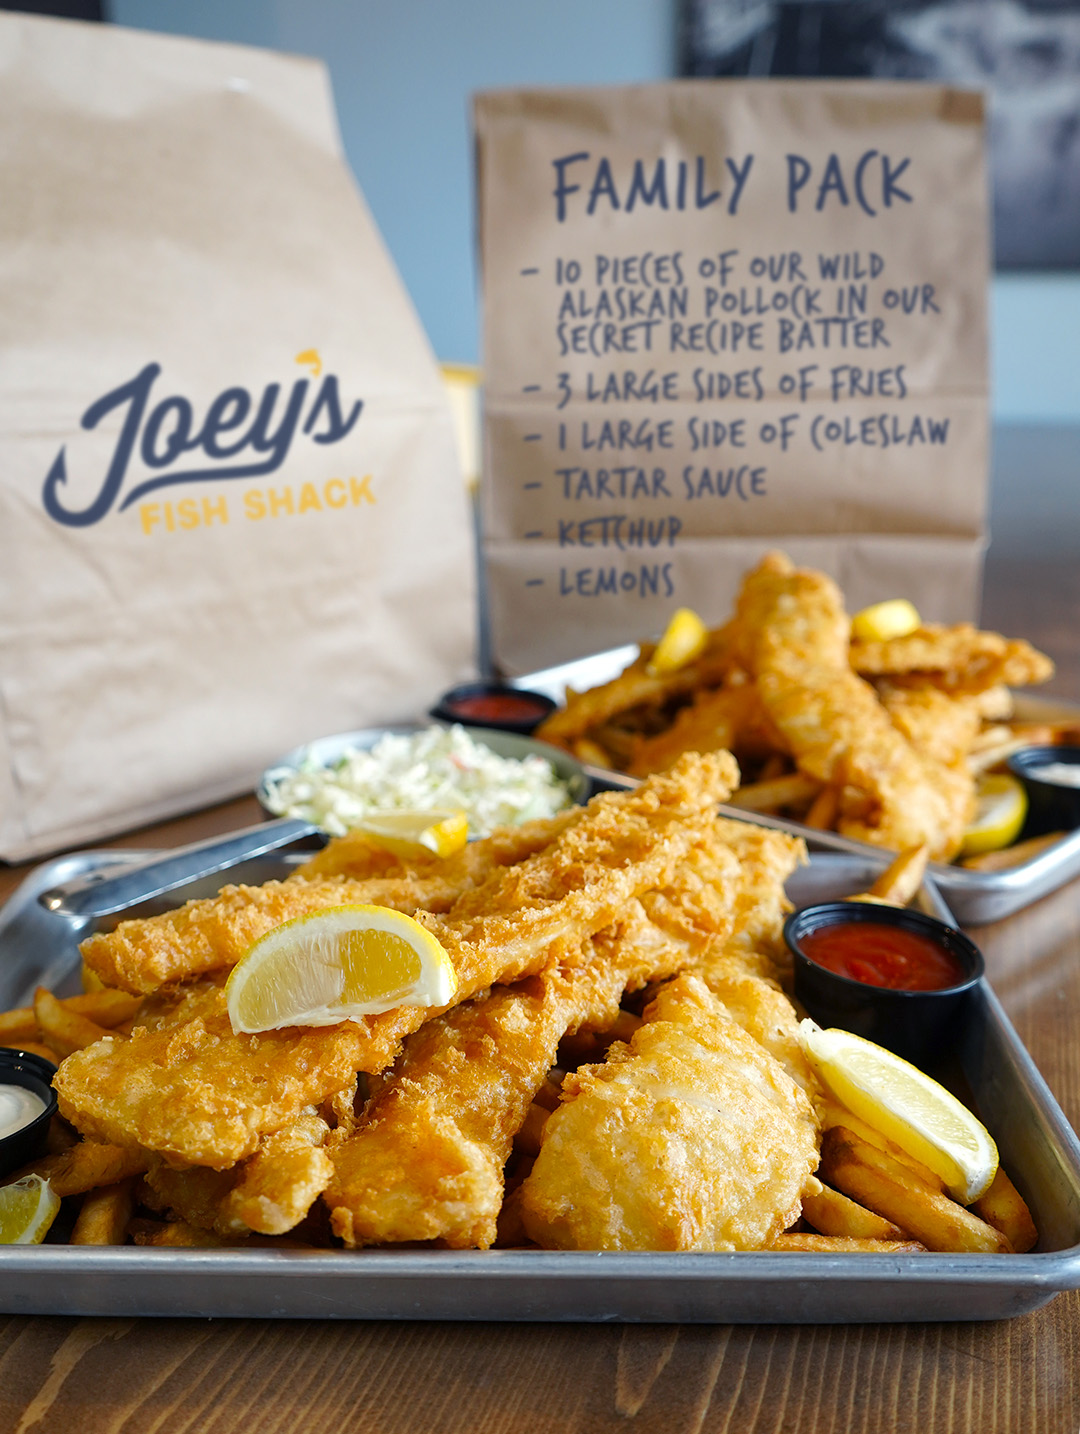 FAMILY PACK - 10 pieces of Wild Alaska Pollock battered in our secret recipe batter, three sides of  Joey's Fish Shack Camrose (780)673-0164